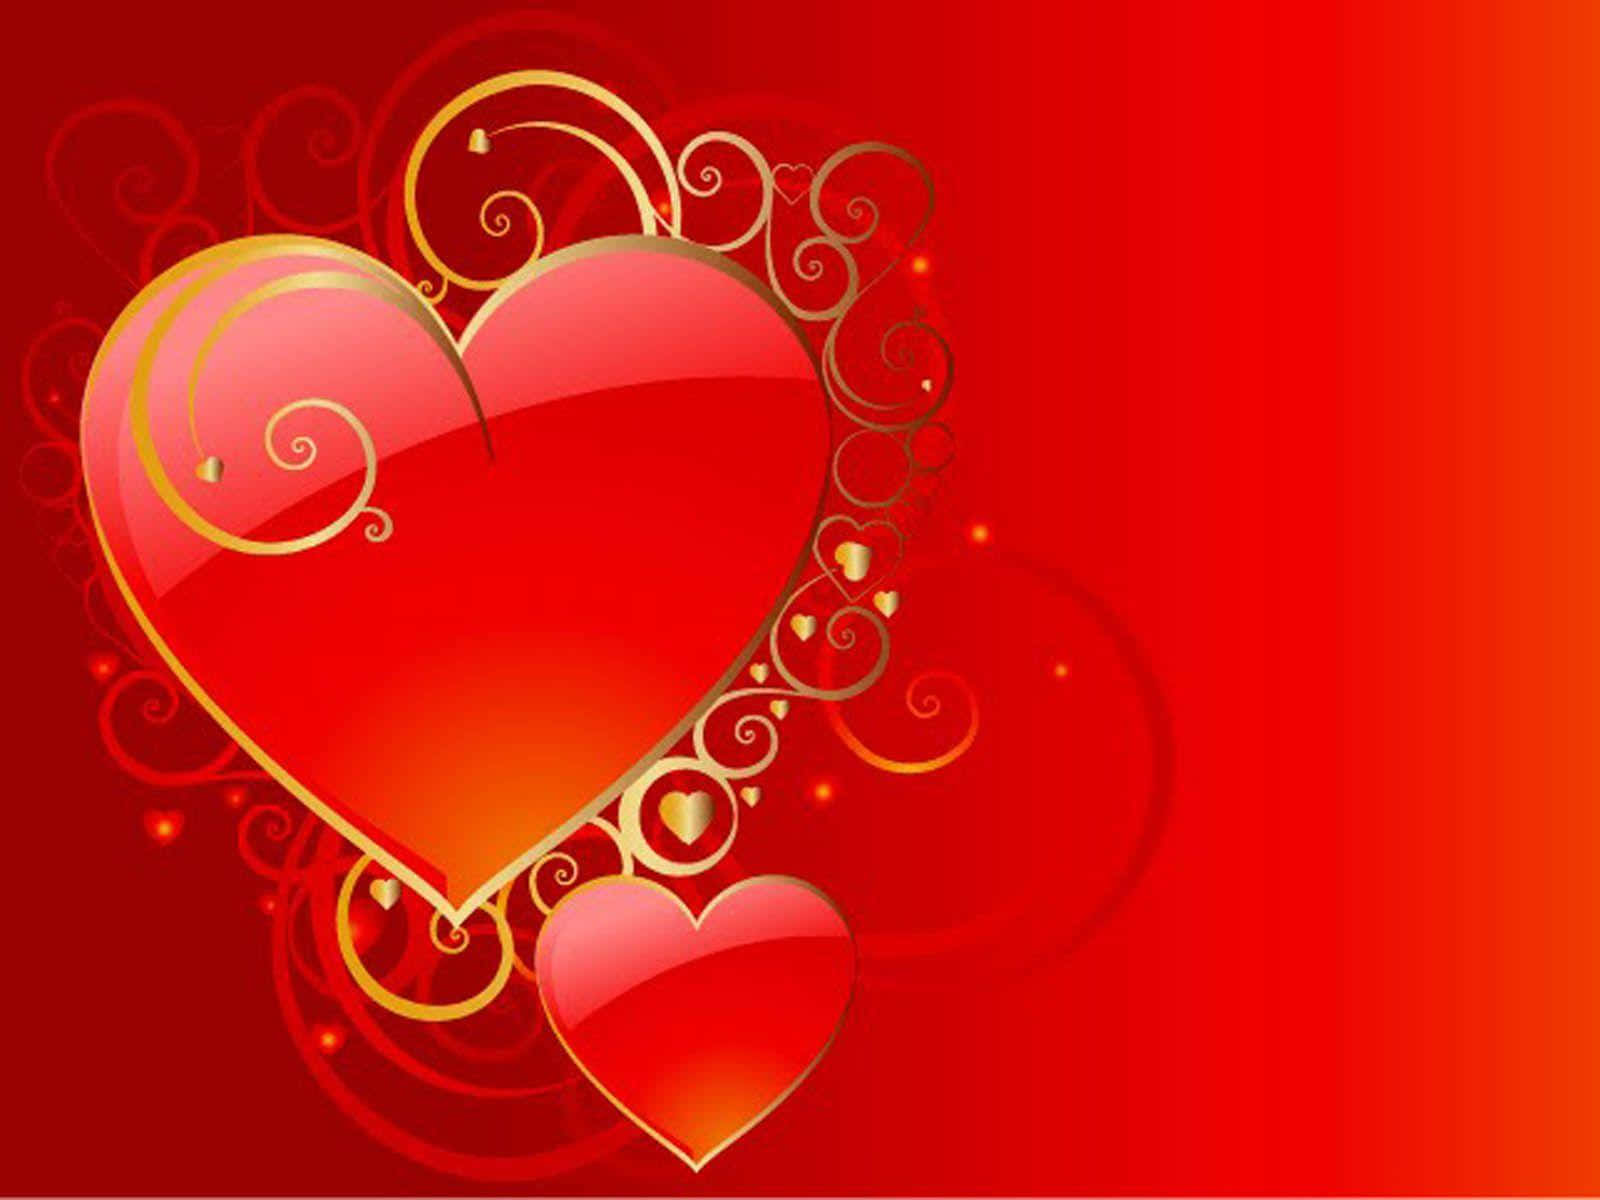 Two Hearts On A Red Background